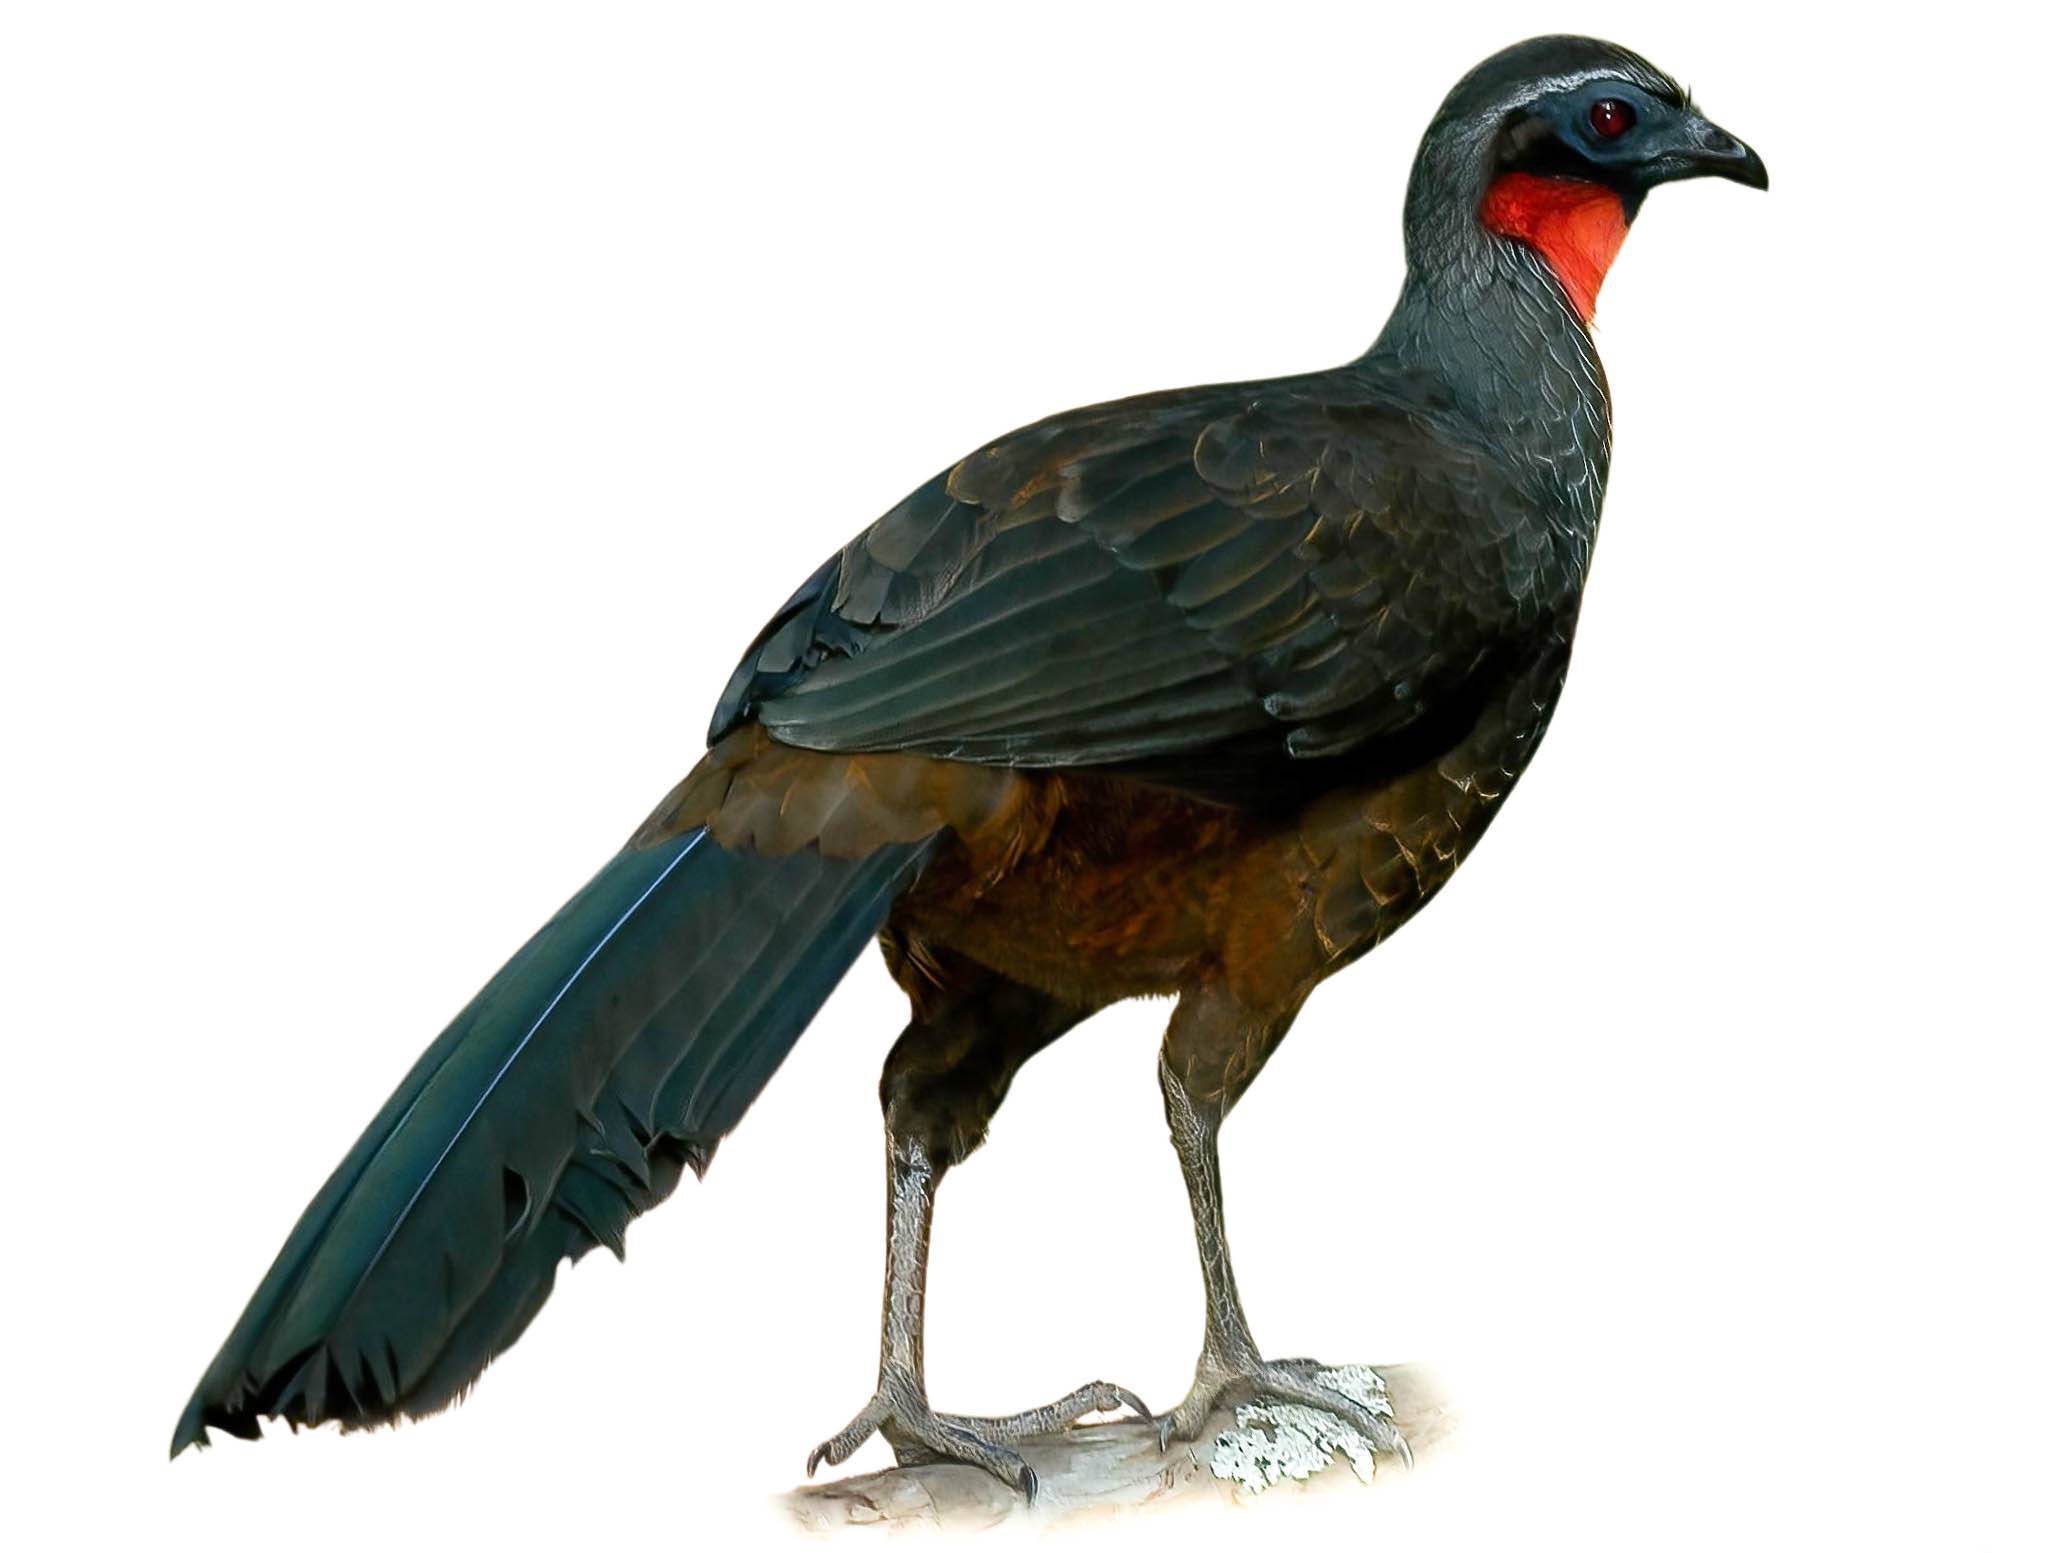 A photo of a Rusty-margined Guan (Penelope superciliaris)